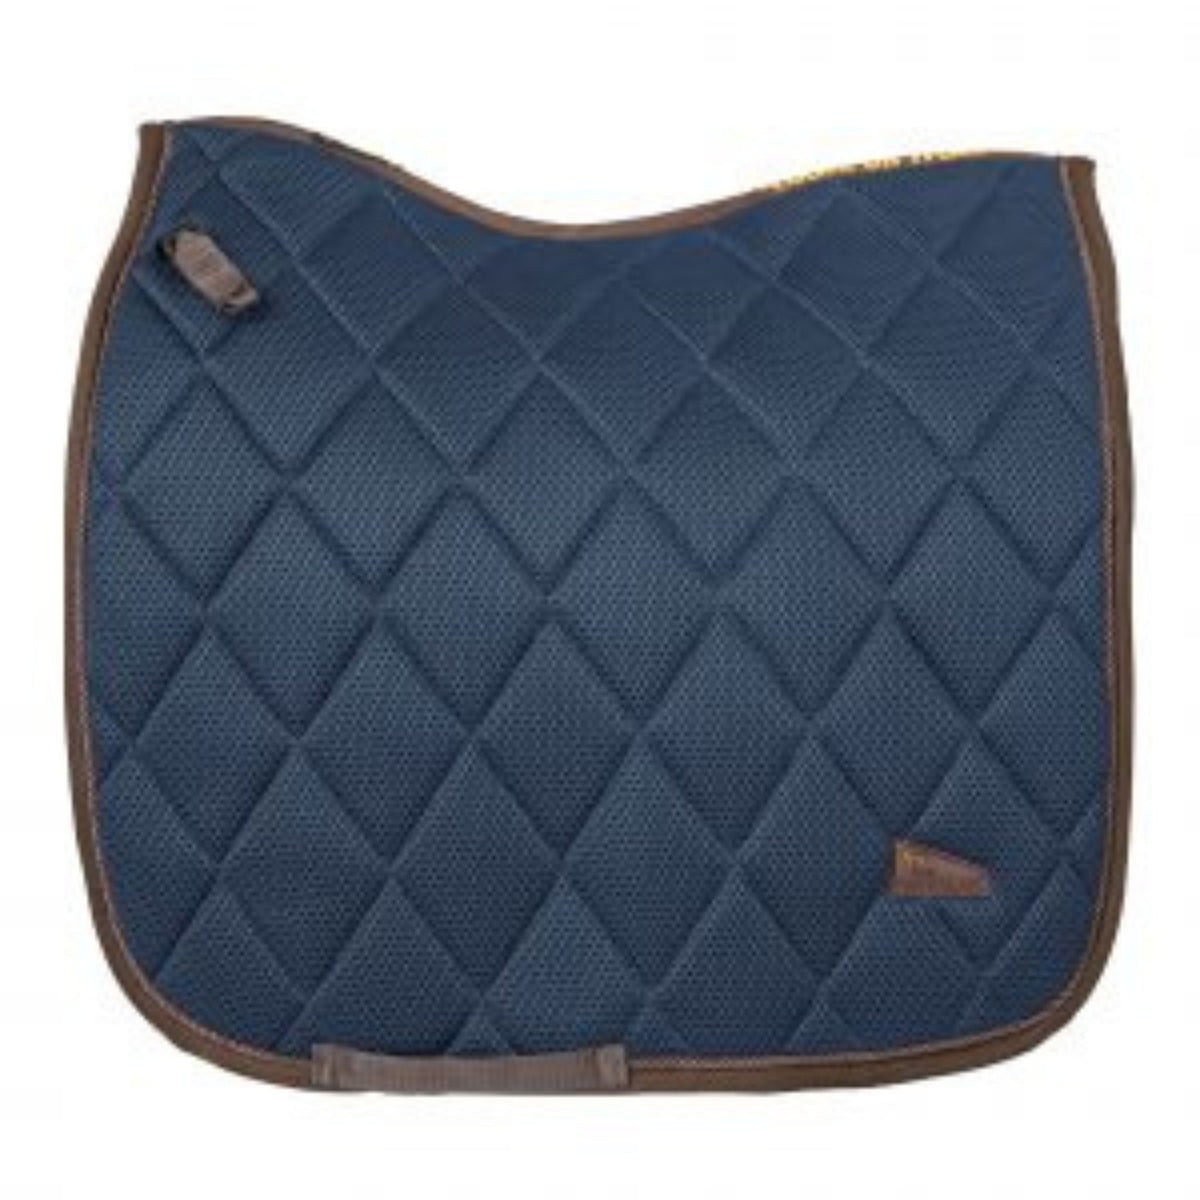 Navy saddle pad with brown trim and high withers cut, including small weltex detailing 